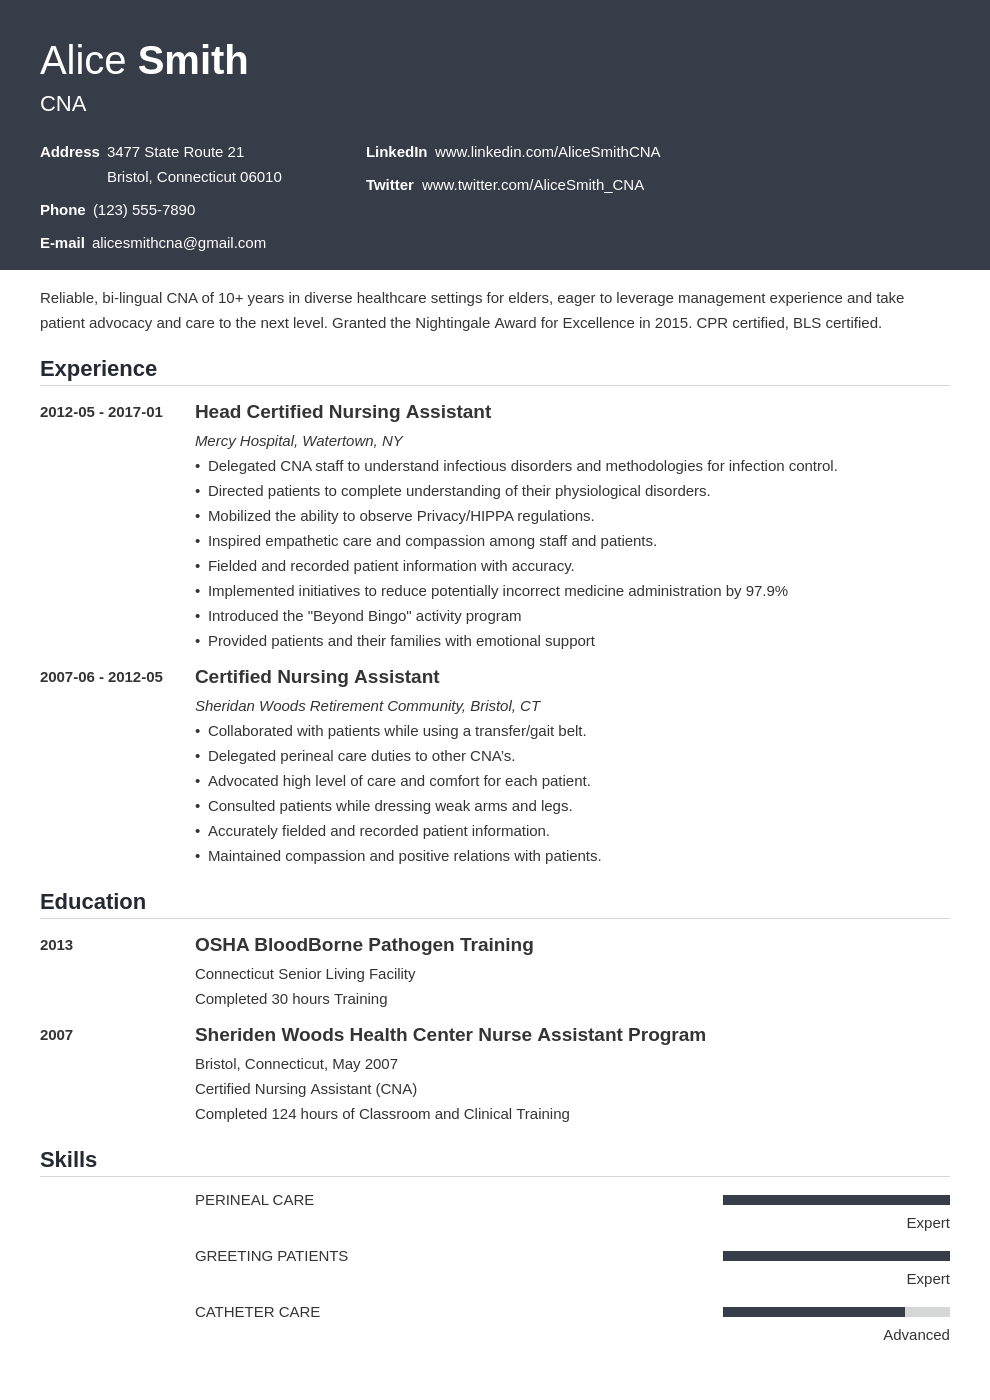 How We Improved Our resume In One Week